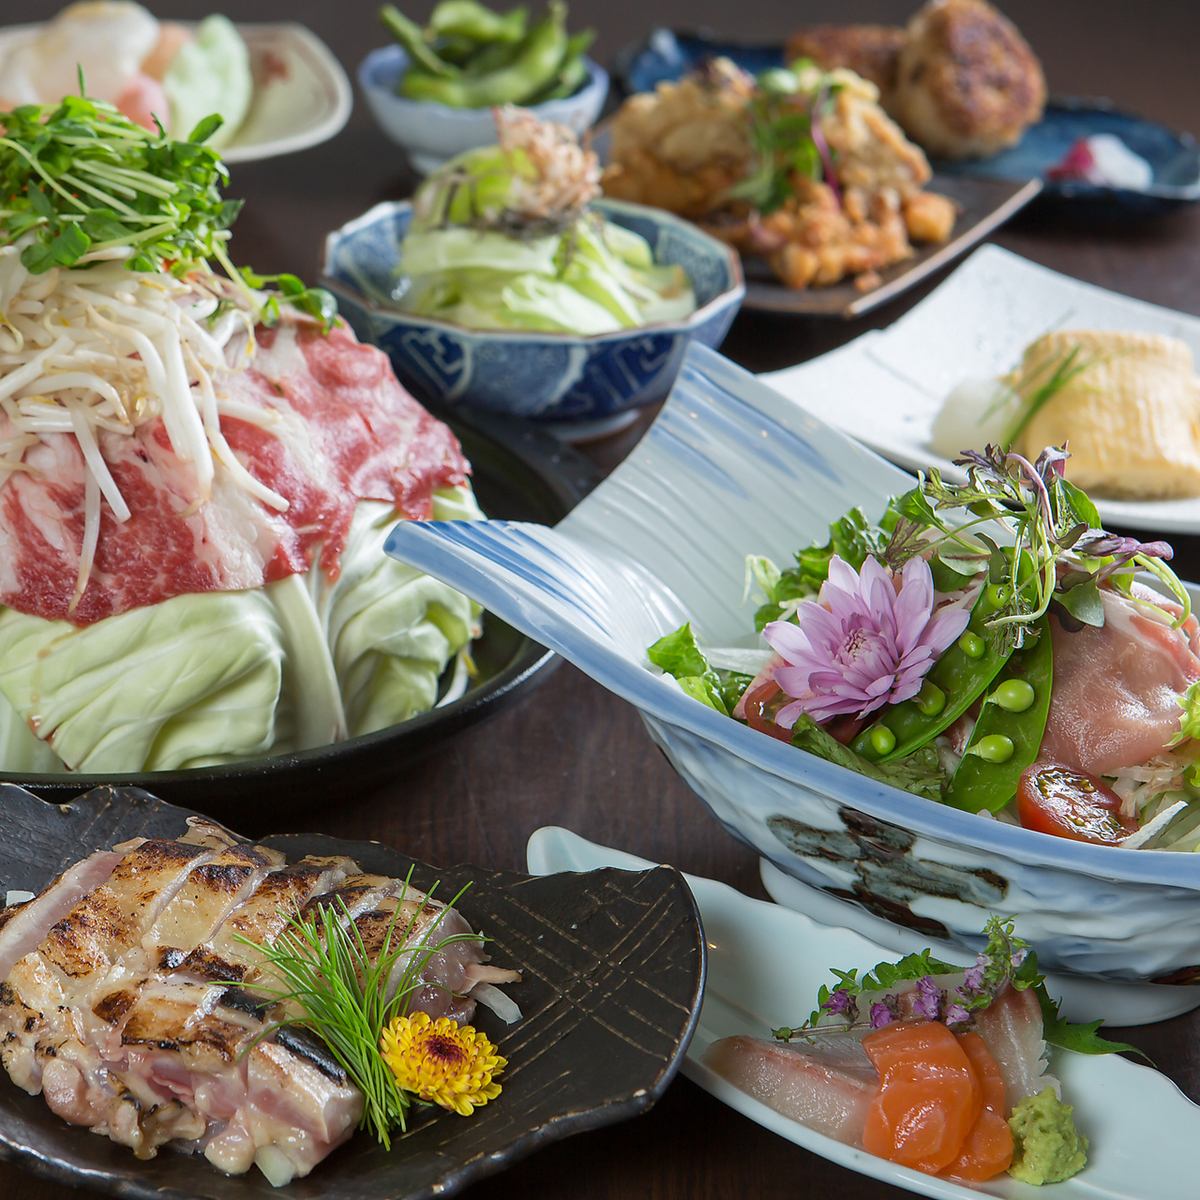 High-end luxury at an affordable price.For kushikatsu & sushi and Japanese food, set meal lunches and banquets ◎